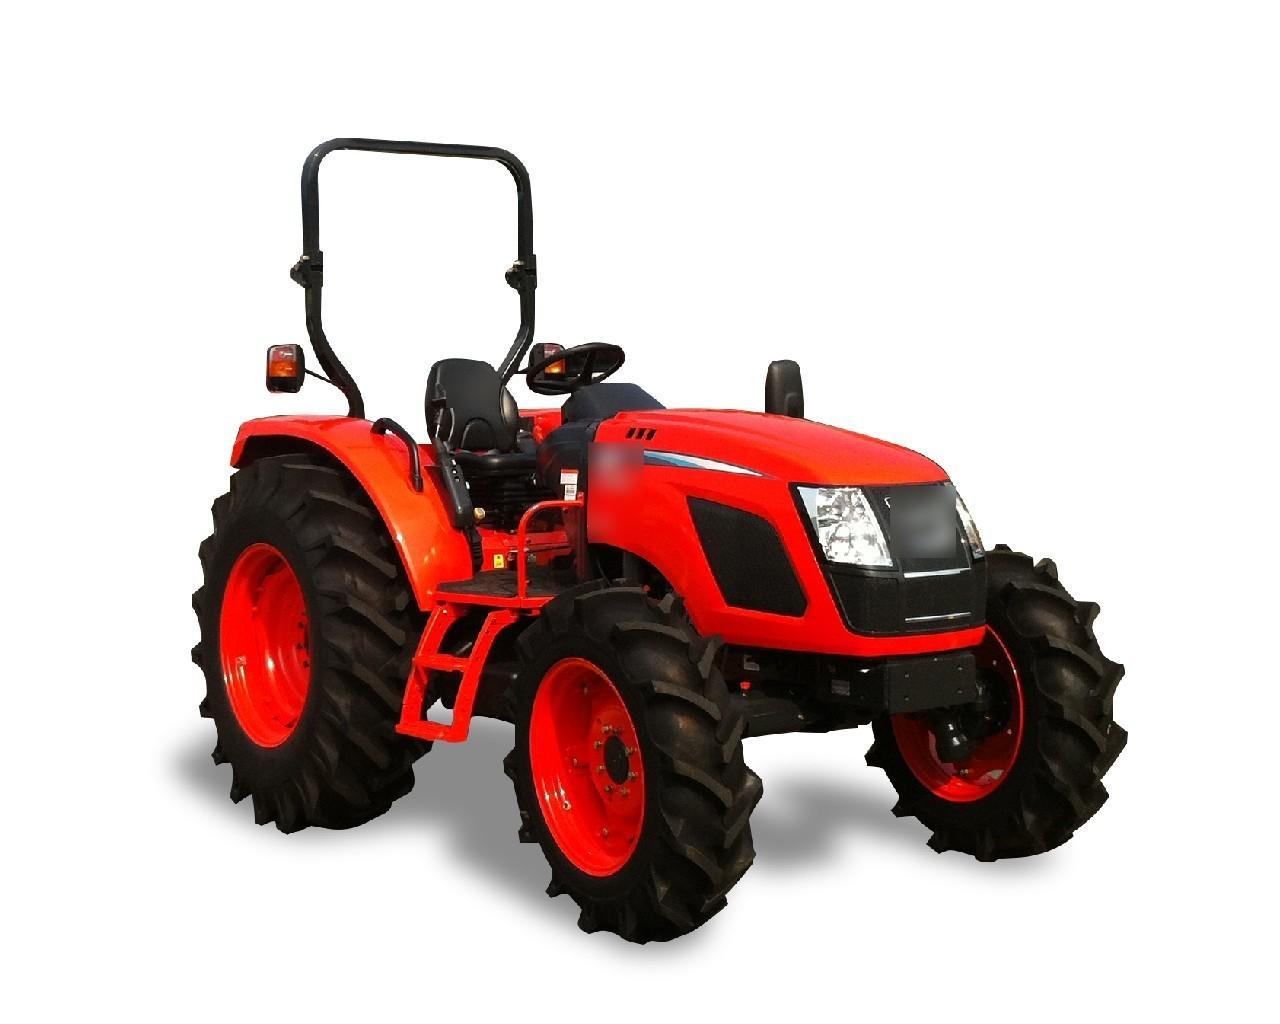 Wallpaper Kioti Tractor For Android Apk